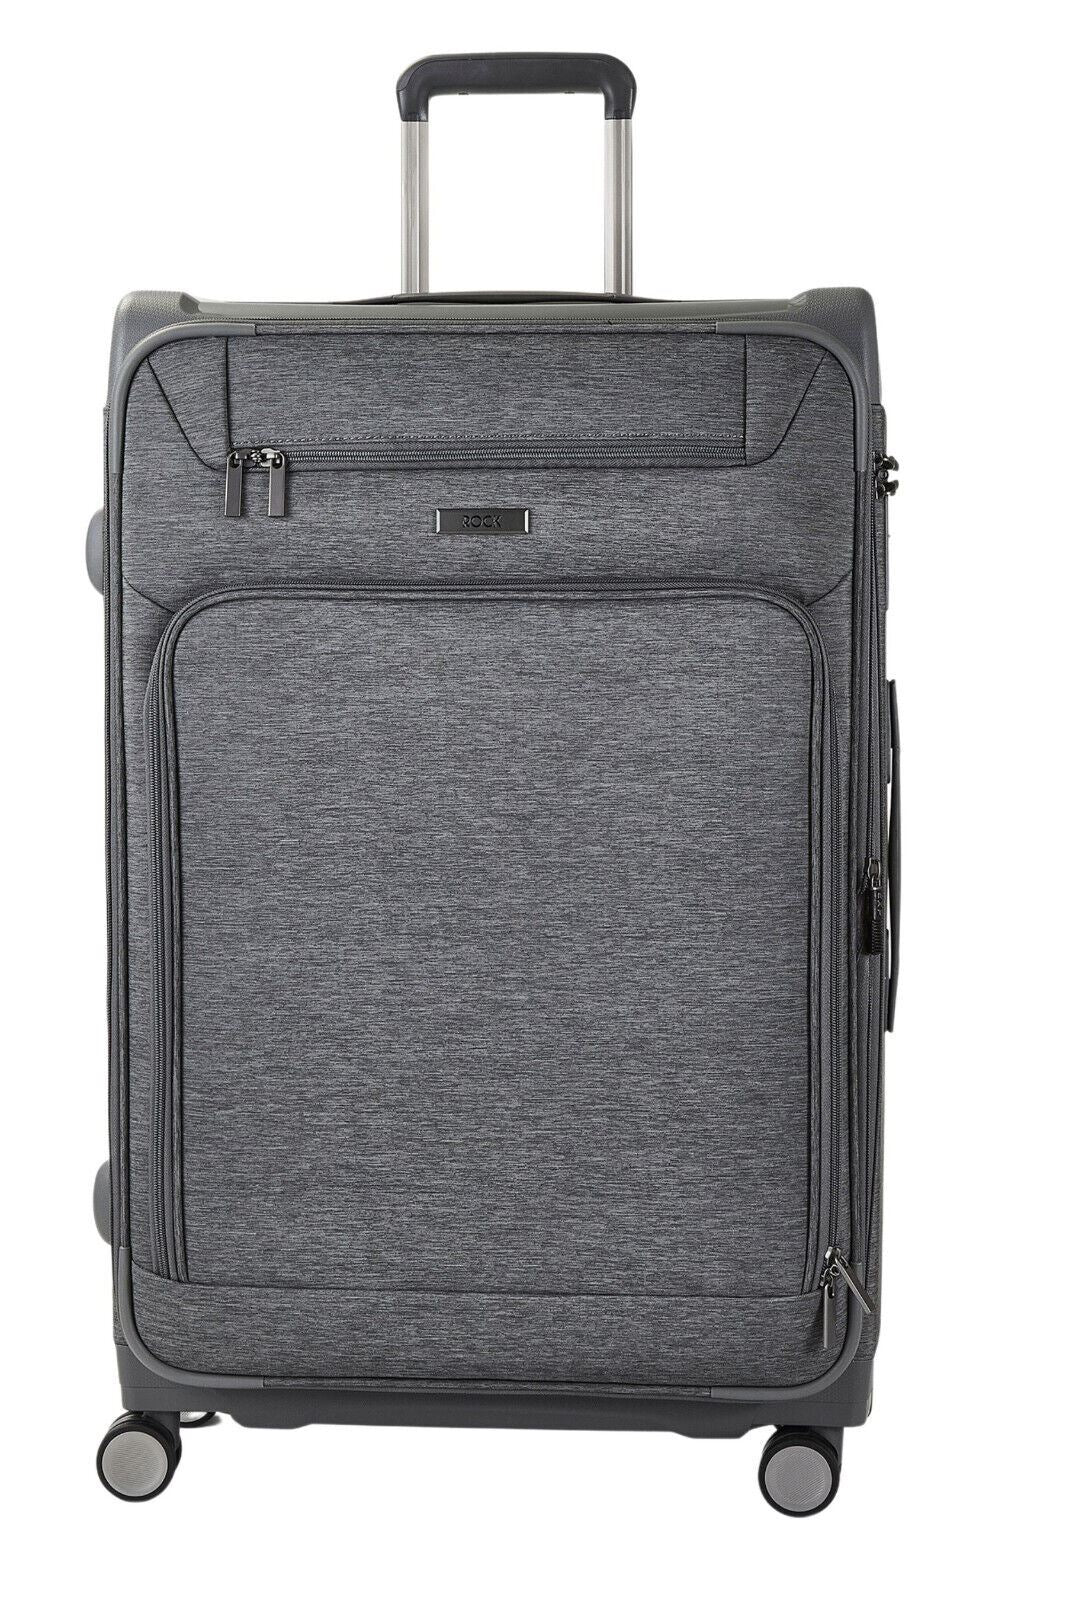 Lightweight Grey Soft Suitcases 4 Wheel Luggage Travel Trolley Cases Cabin Bags